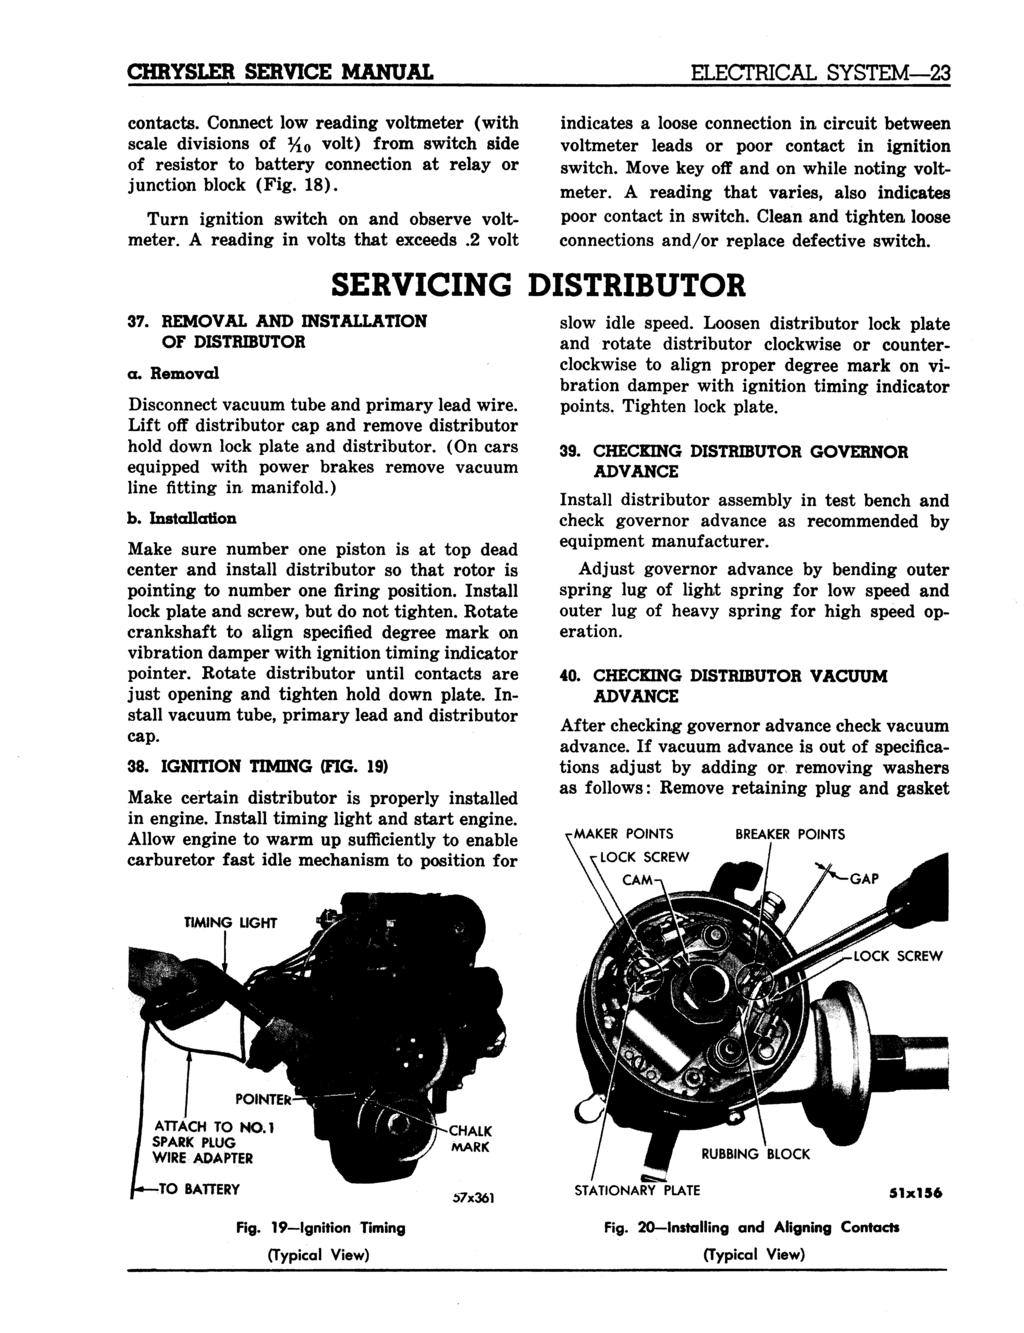 SERVICE MANUAL contacts. Connect low reading voltmeter (with scale divisions of % 0 volt) from switch side of resistor to battery connection at relay or junction block (Fig. 18).